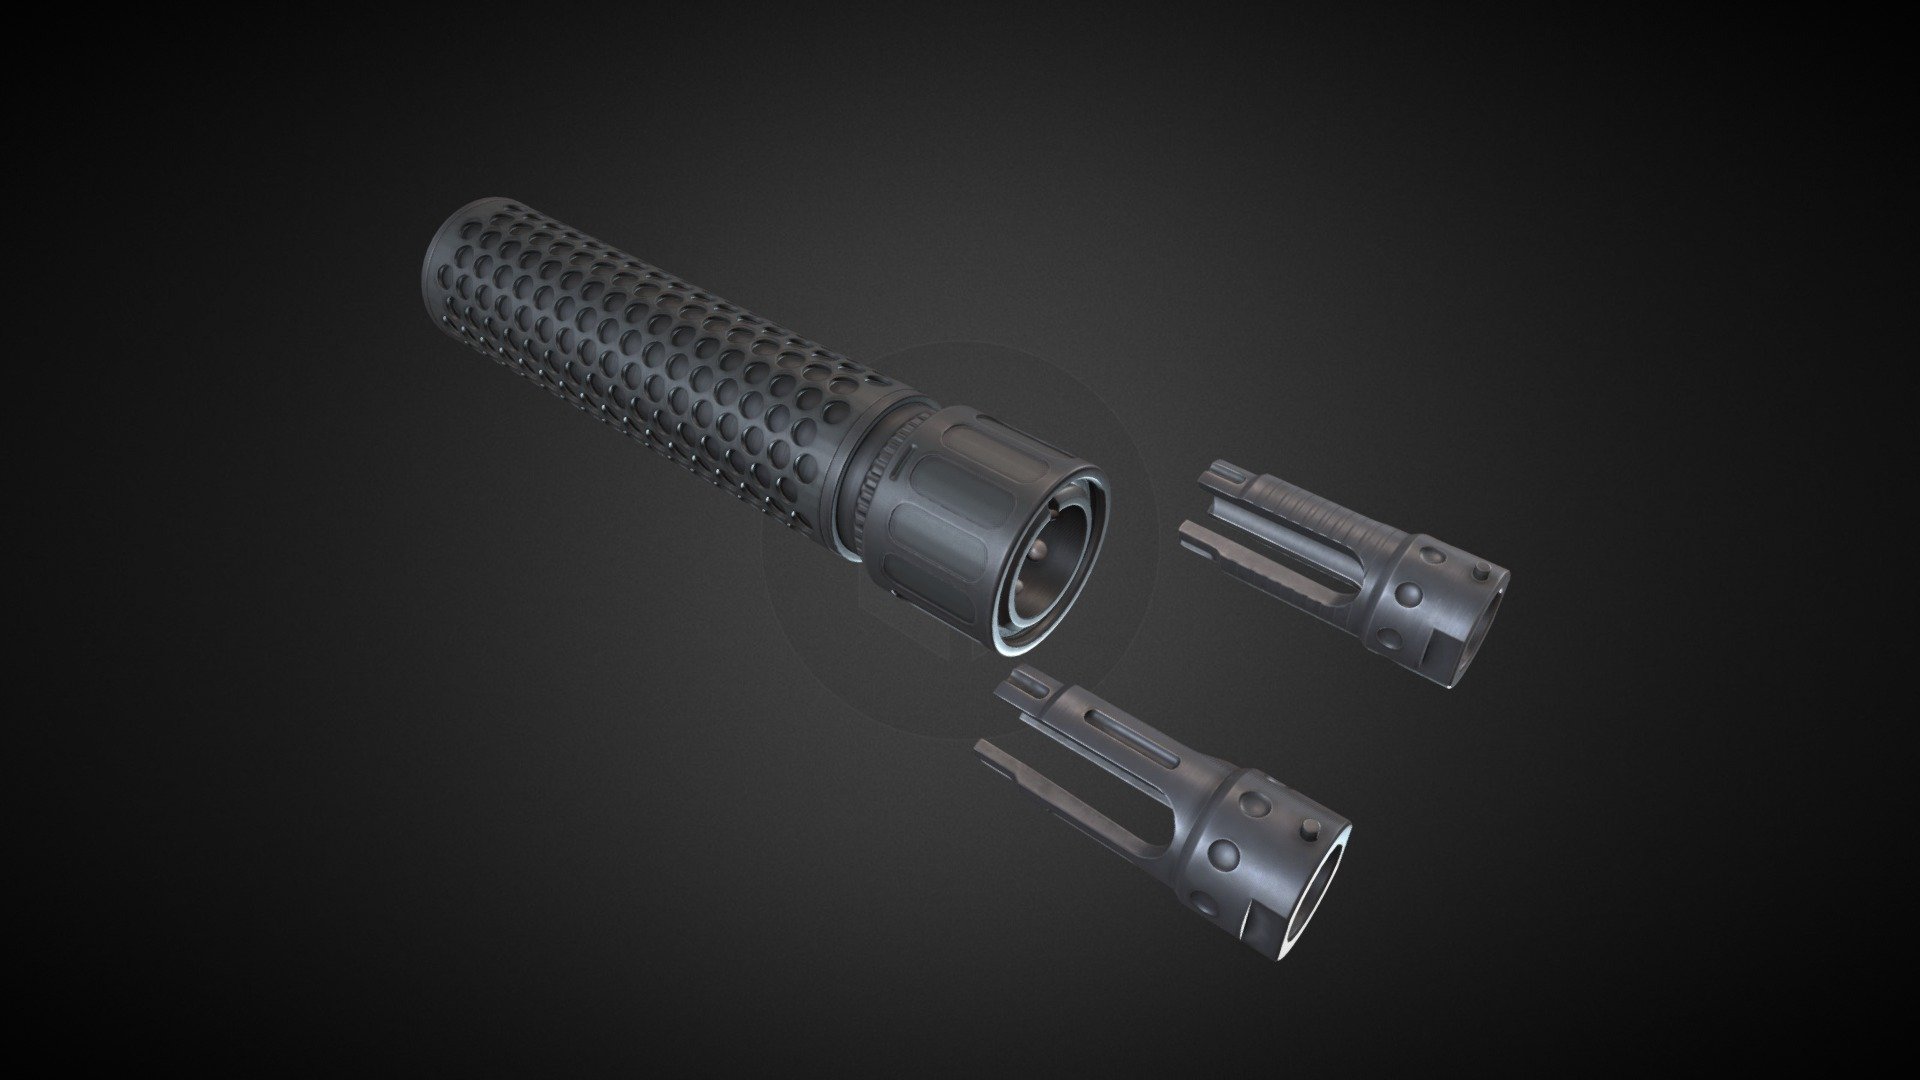 5.56mm QDC 3-Prong Muzzle device and sound suppressor.  

All parts have separate PBR materials in 4K. Black and FDE colors are included.

Tris:25K

Verts: 15K

Yes. that model is chunky, its hard to not make it big with all those holes on suppressor. And making them have less tris or baking them on normal make it look weird as hell.  

Made in Blender.  

PS. Model is not made to be 3D printed. Please do not ask for conversion or scale for print 3d model